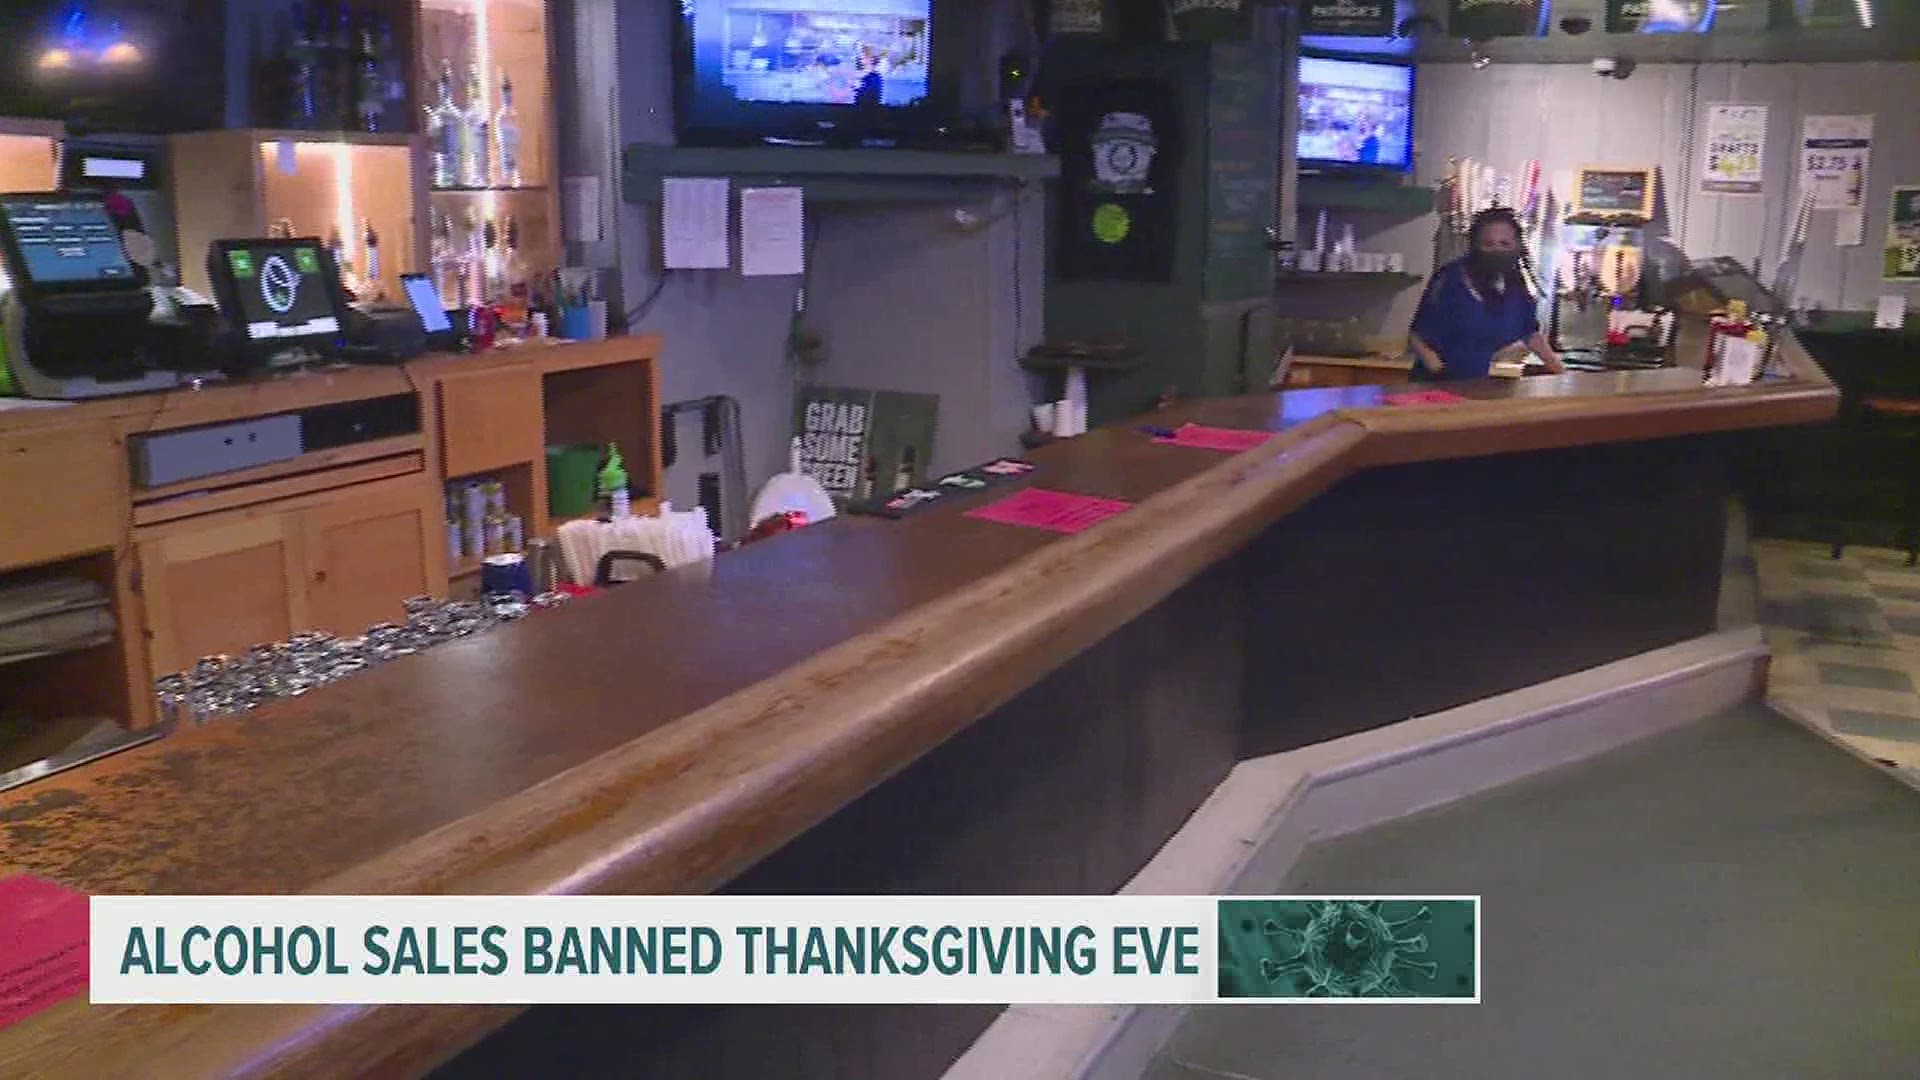 The alcohol stopped flowing at 5 p.m. on what’s normally the busiest drinking day of the year, the night before Thanksgiving.